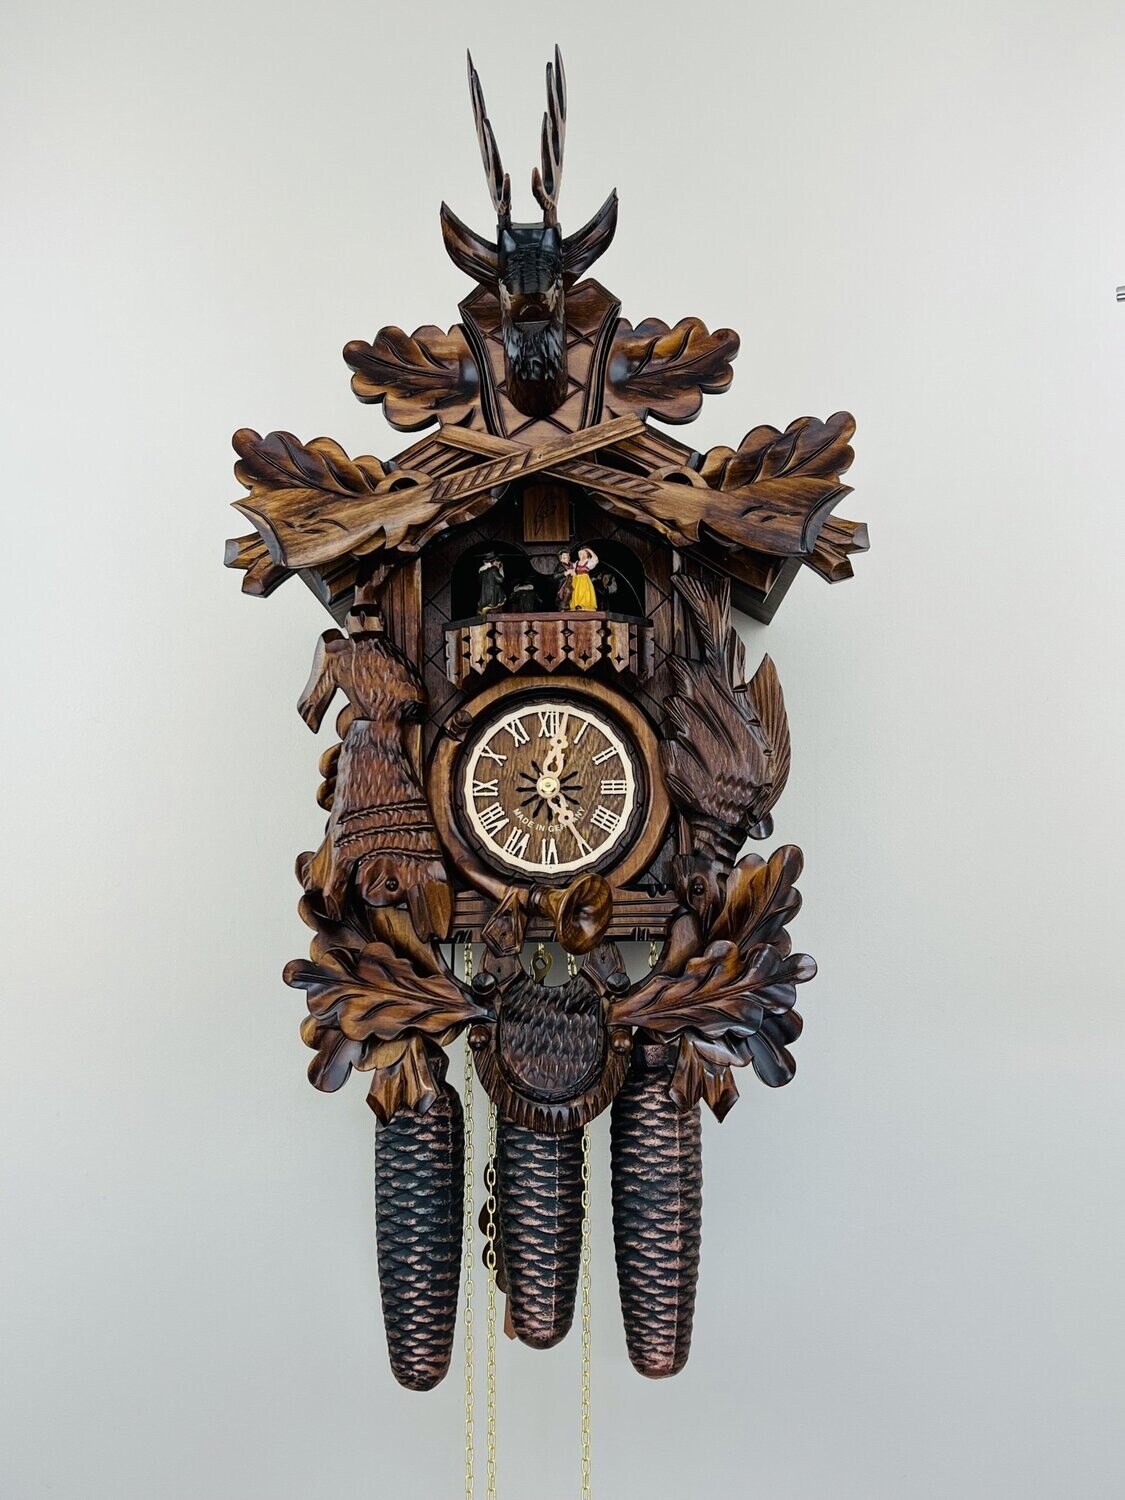 21" Eight Day Musical Hunter's Cuckoo Clock with Dancers - Hand-carved Dead  Animals, Leaves, and Buck